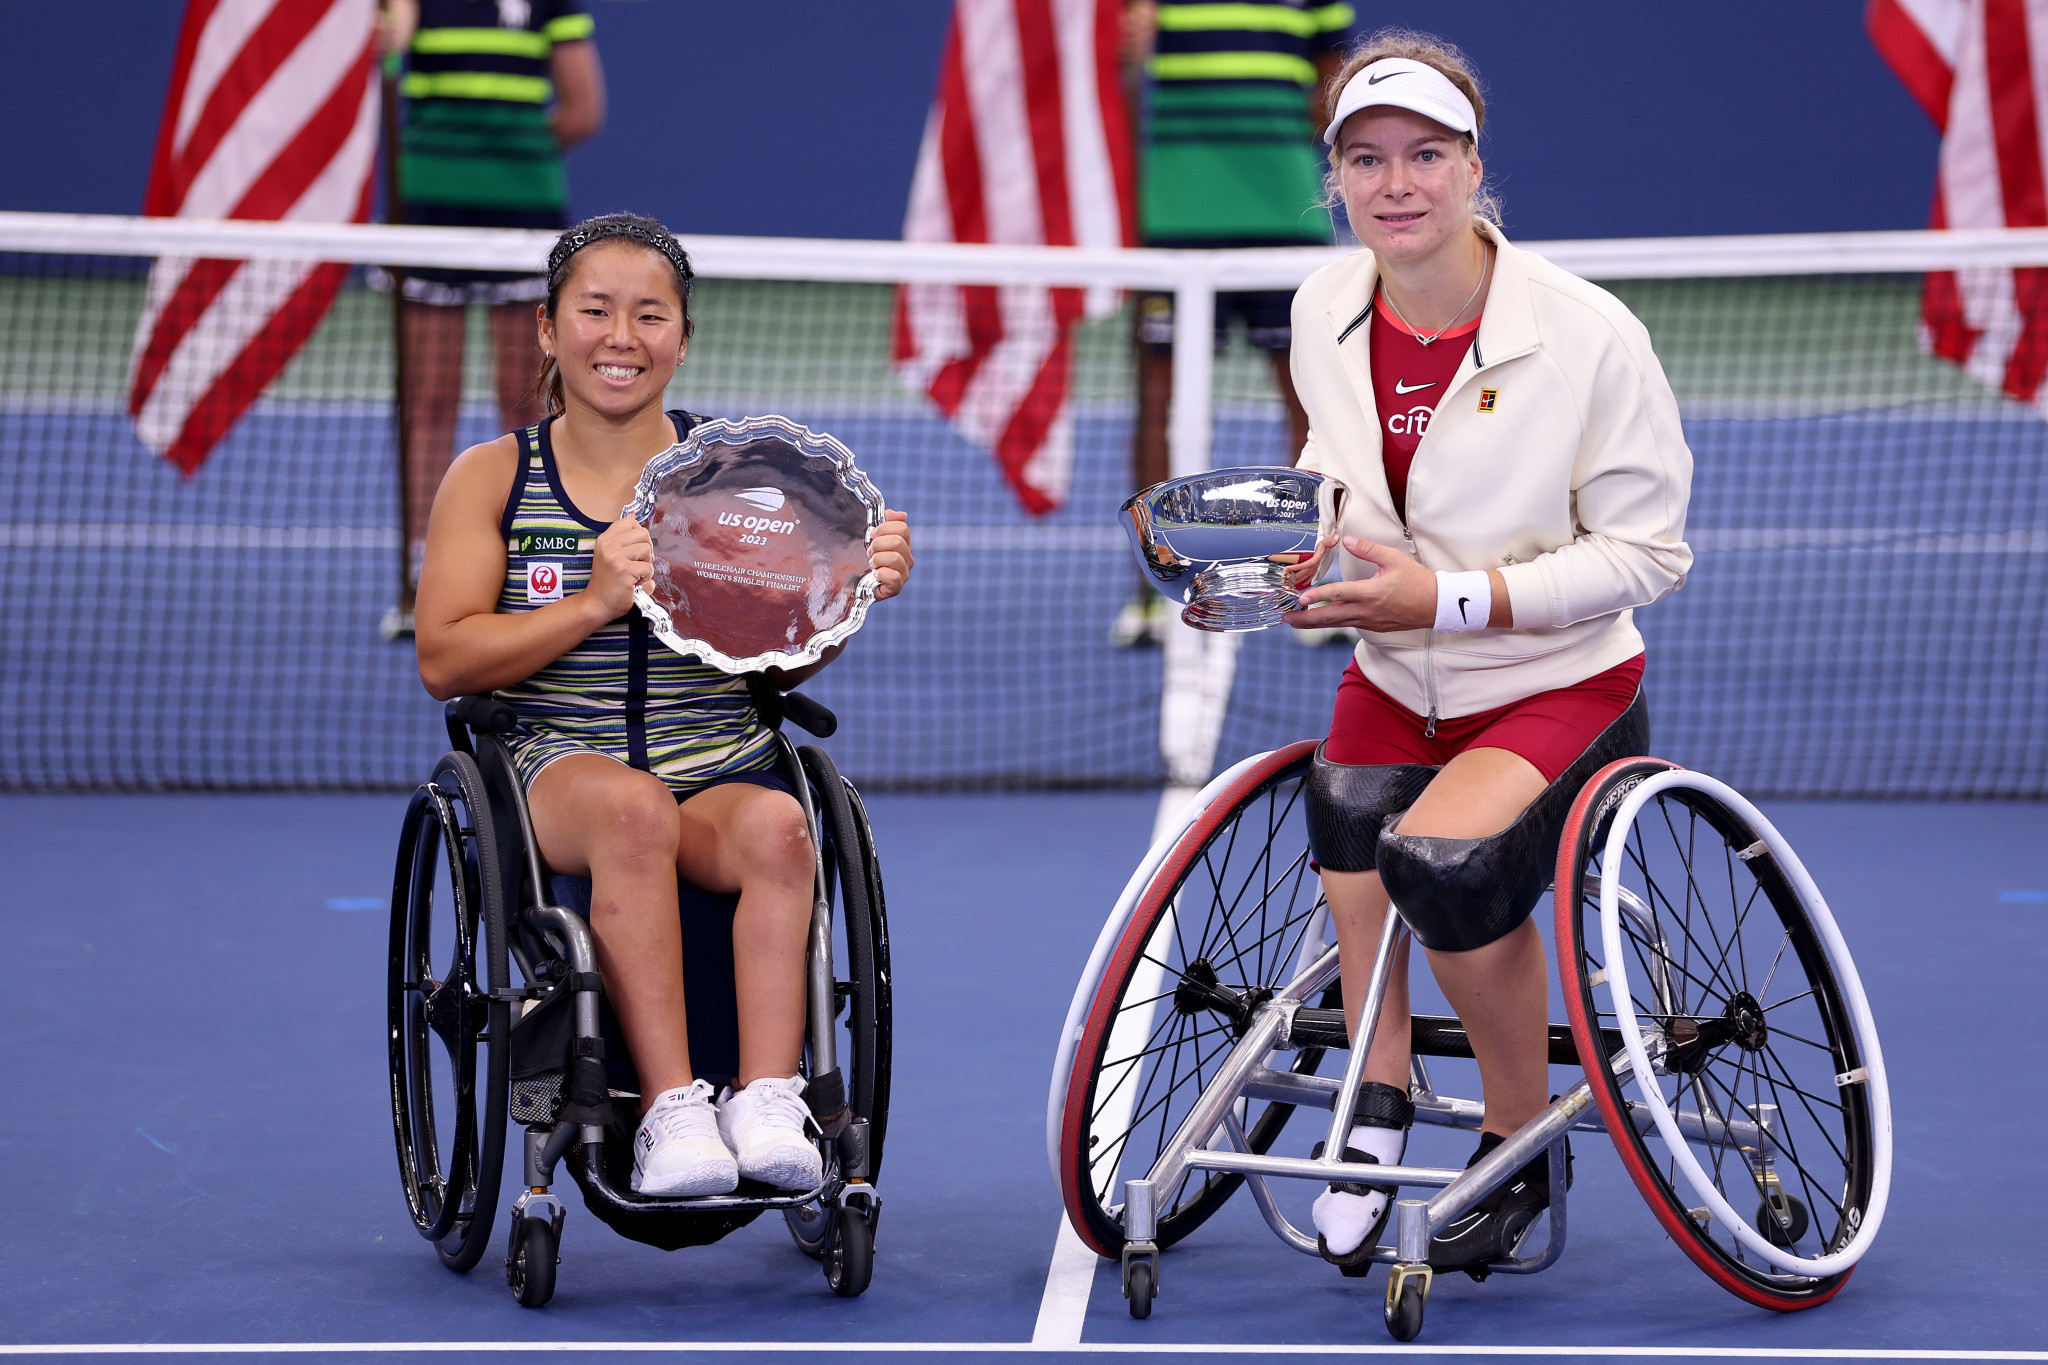 De Groot and Hewett claim wheelchair singles titles at US Open